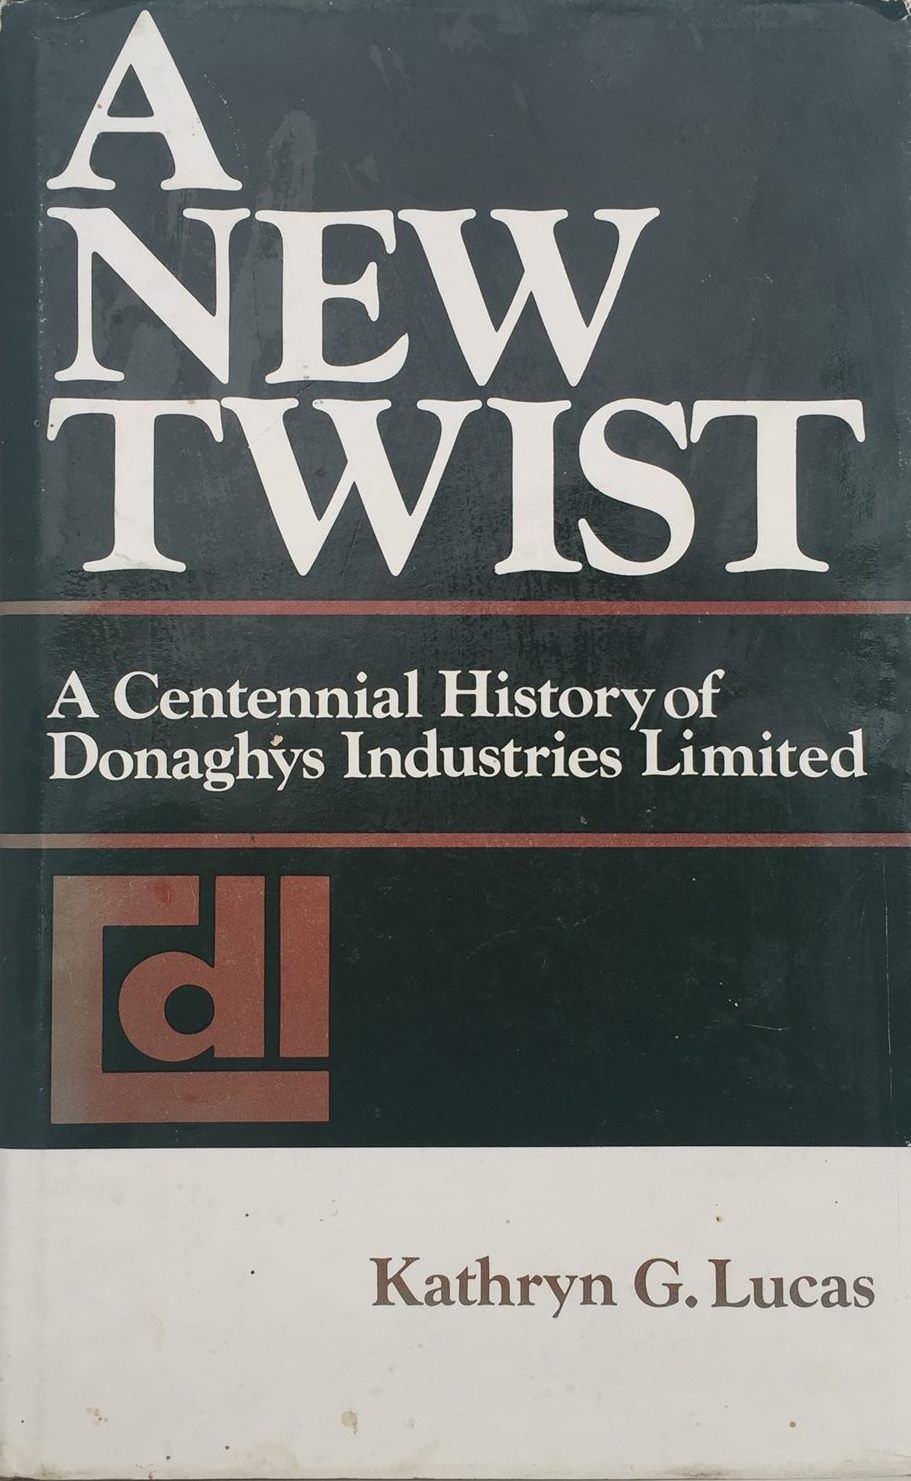 A NEW TWIST: A Centennial History of Donaghys Industries